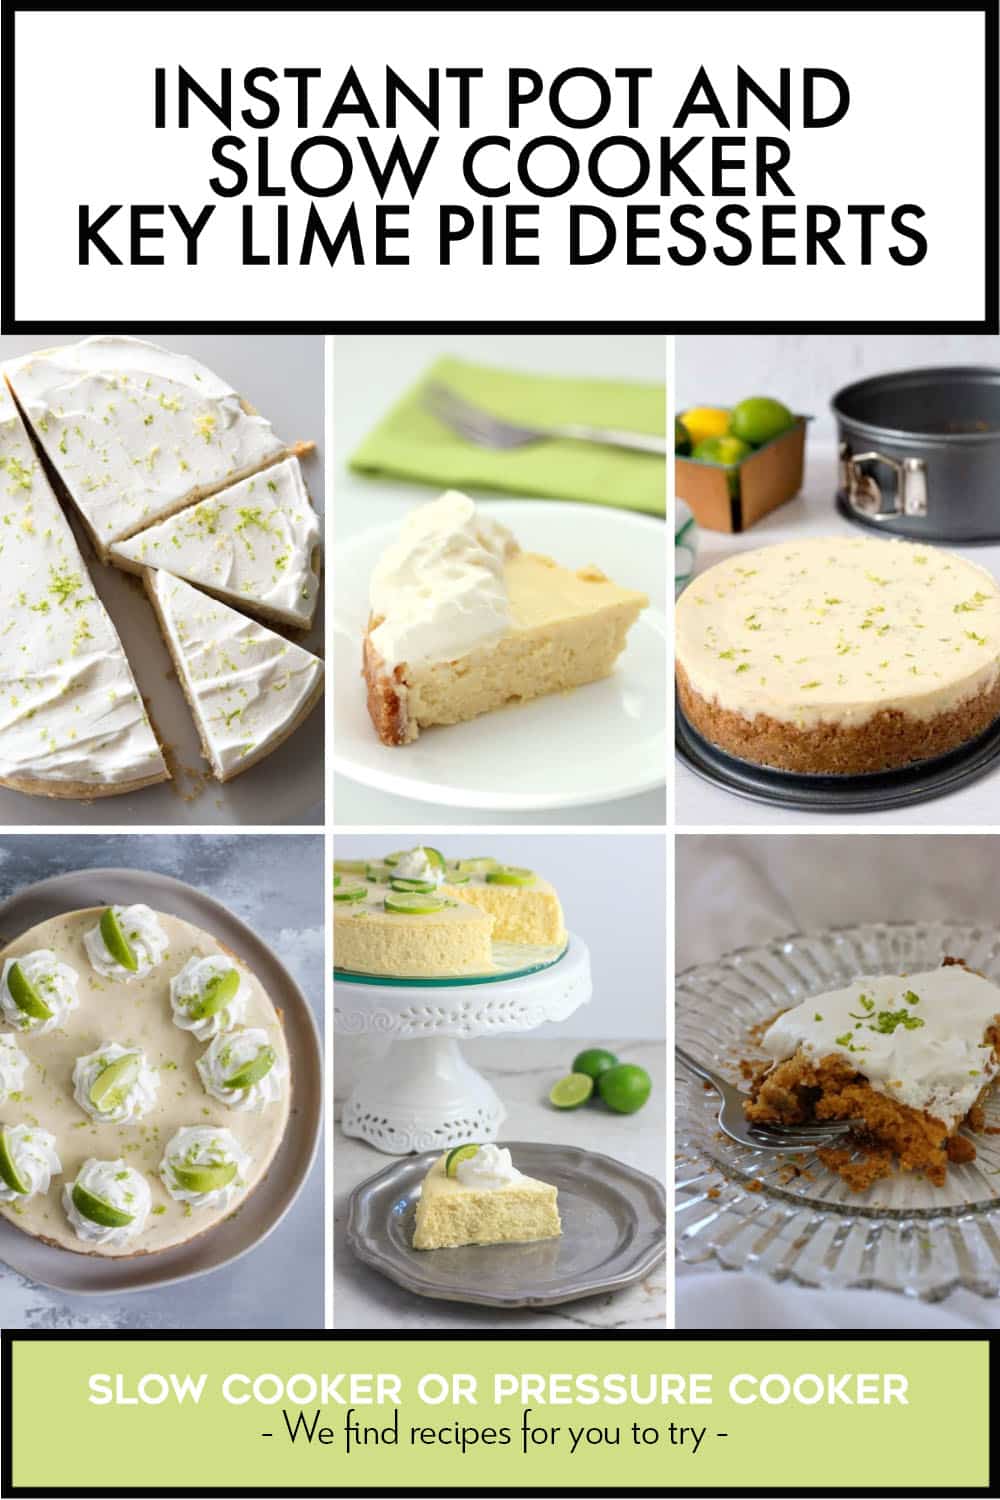 Pinterest image of Instant Pot and Slow Cooker Key Lime Pie Desserts